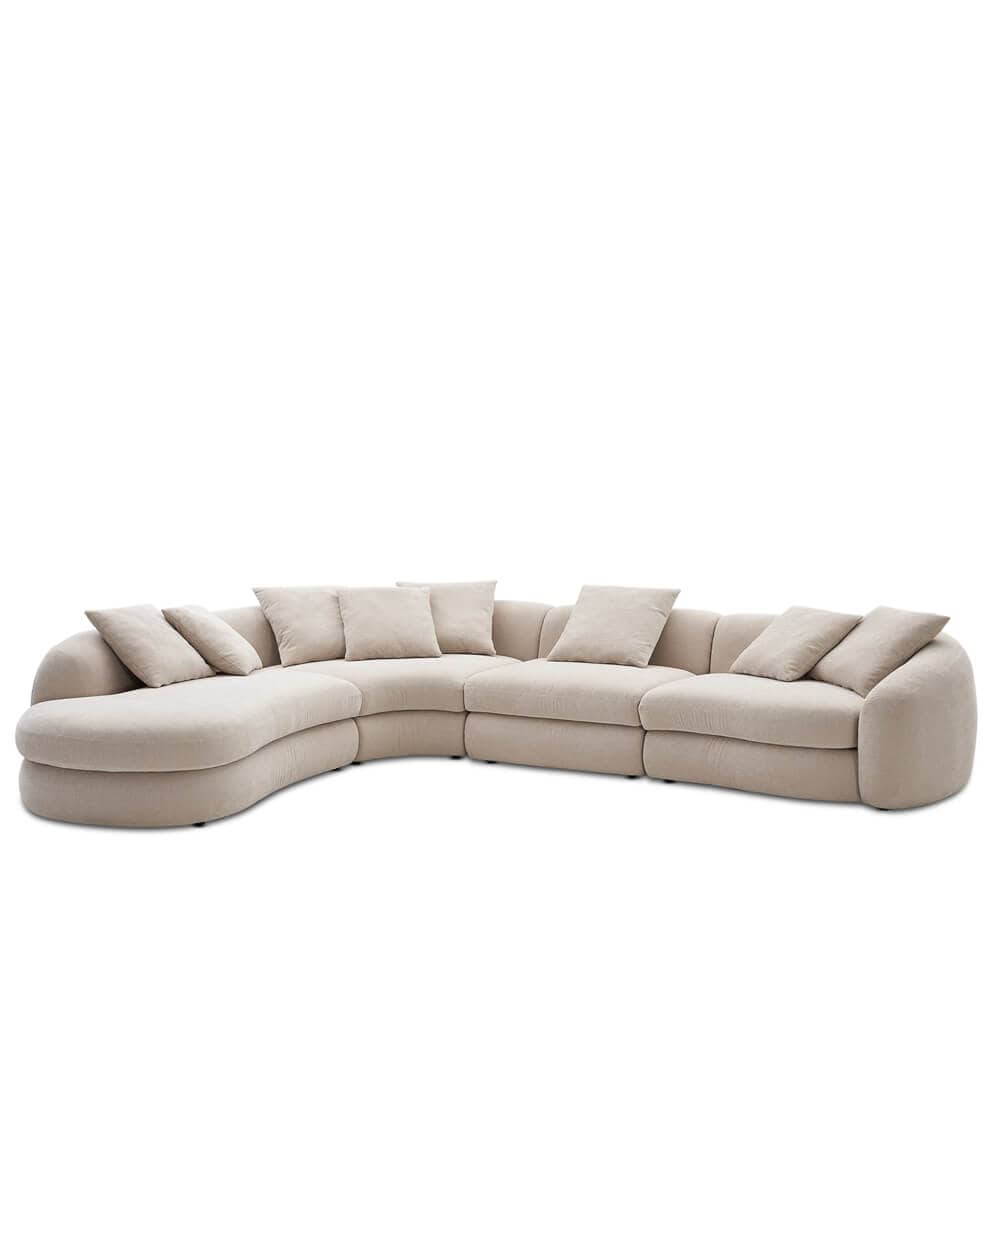 Citizenry Fable Performance Fabric Extended Chaise Sectional Sofa